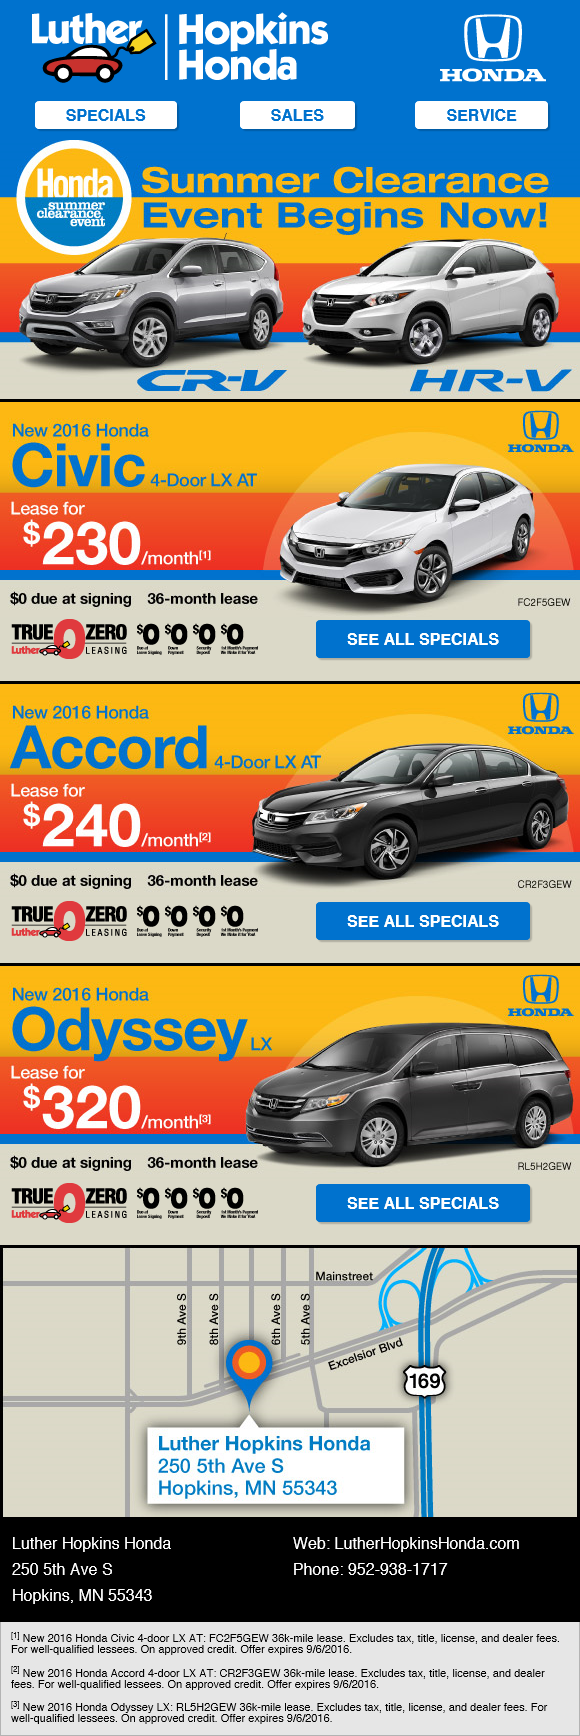 Luther Brookdale Honda Email